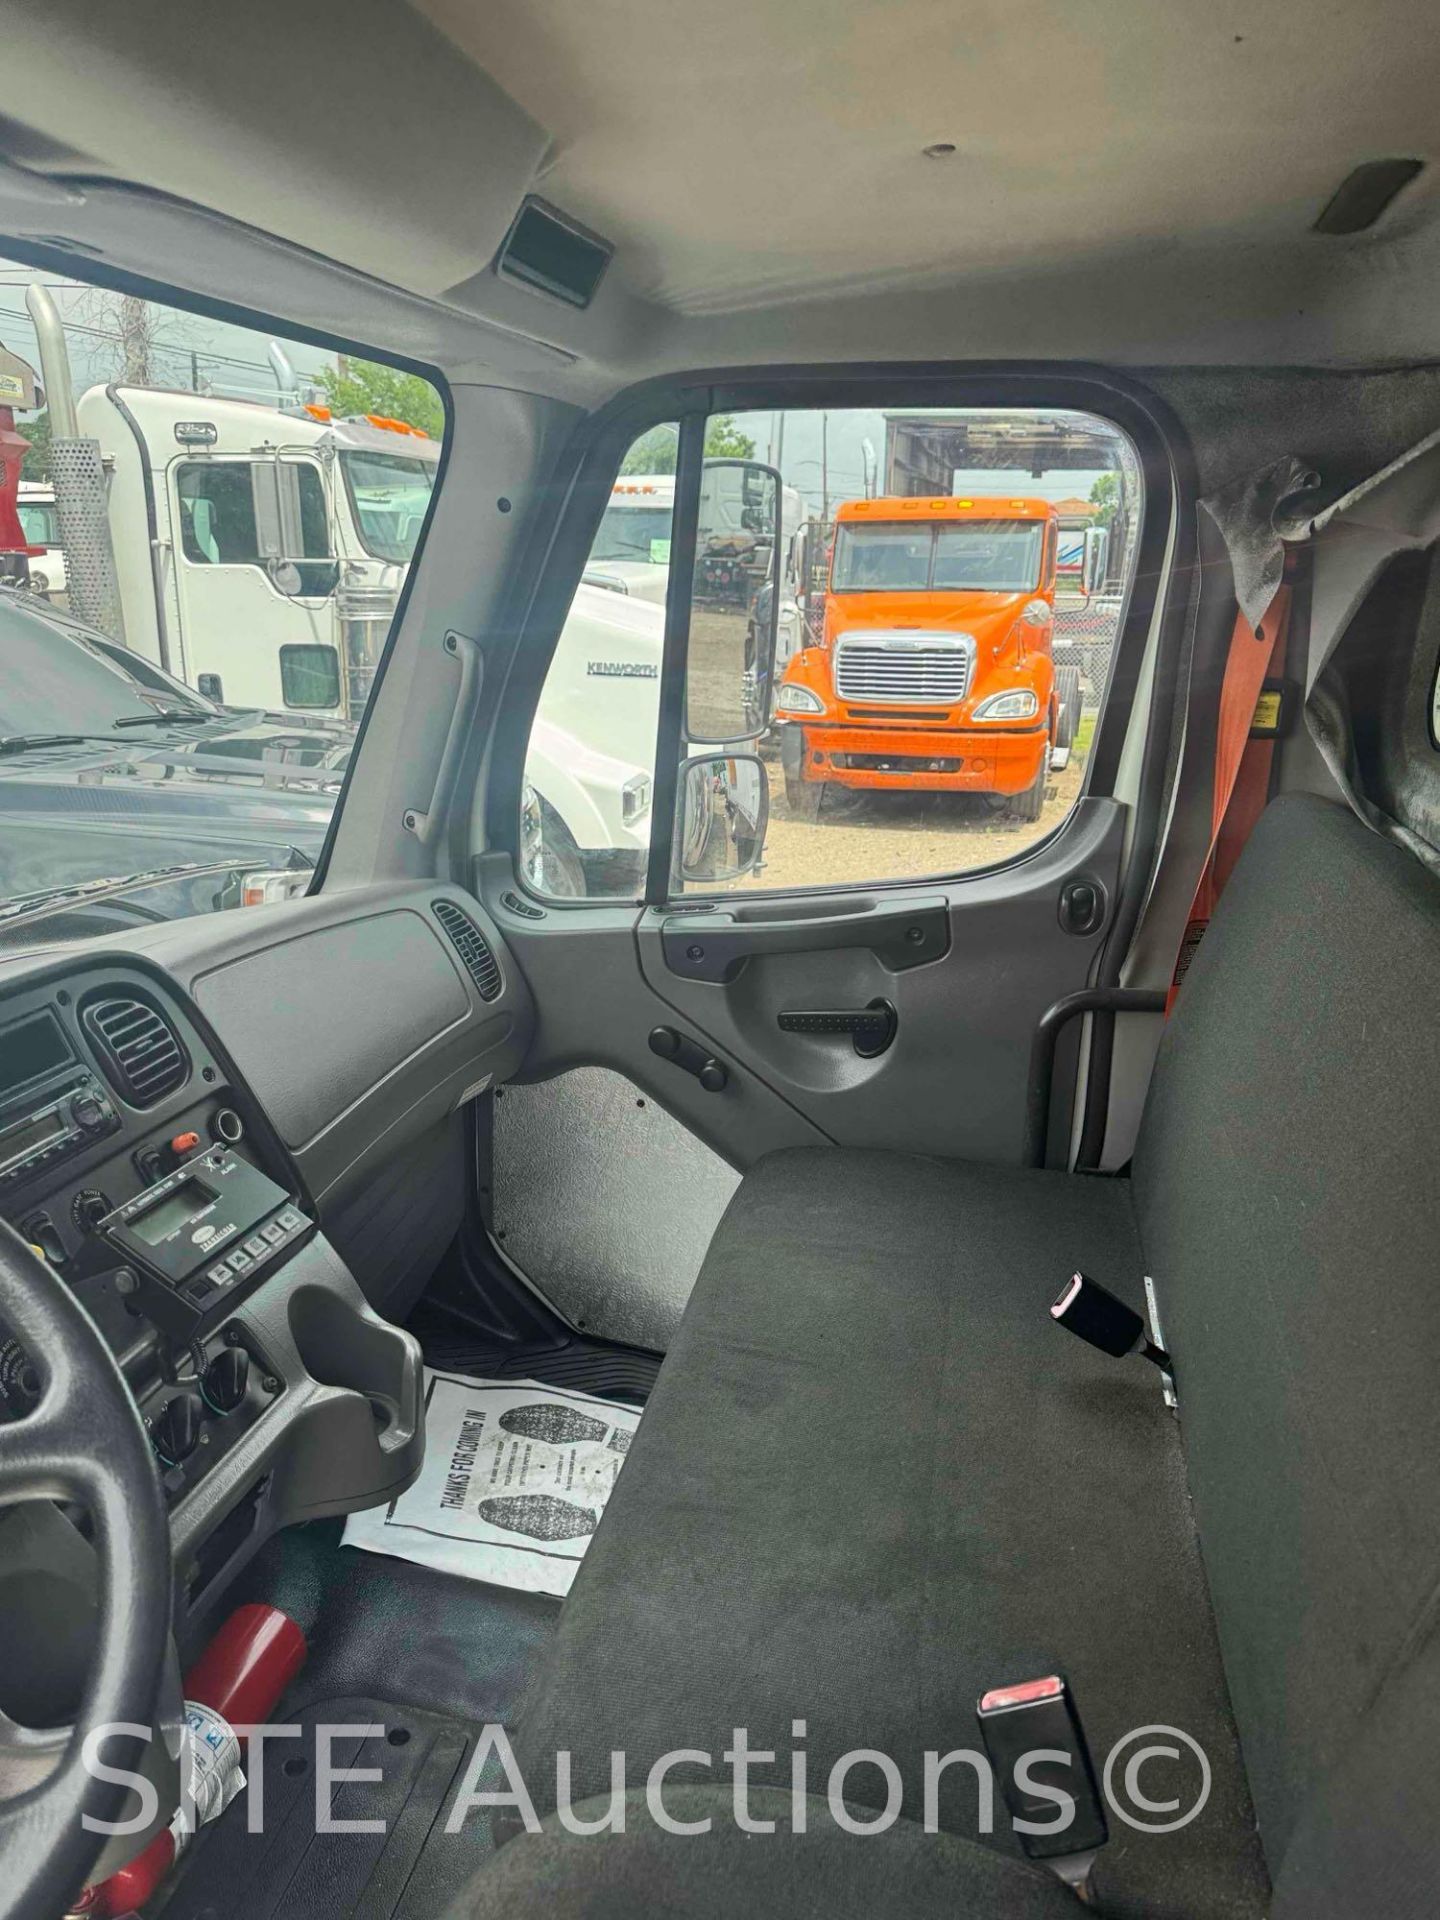 2012 Freightliner M2 Business S/A Reefer Truck - Image 29 of 34